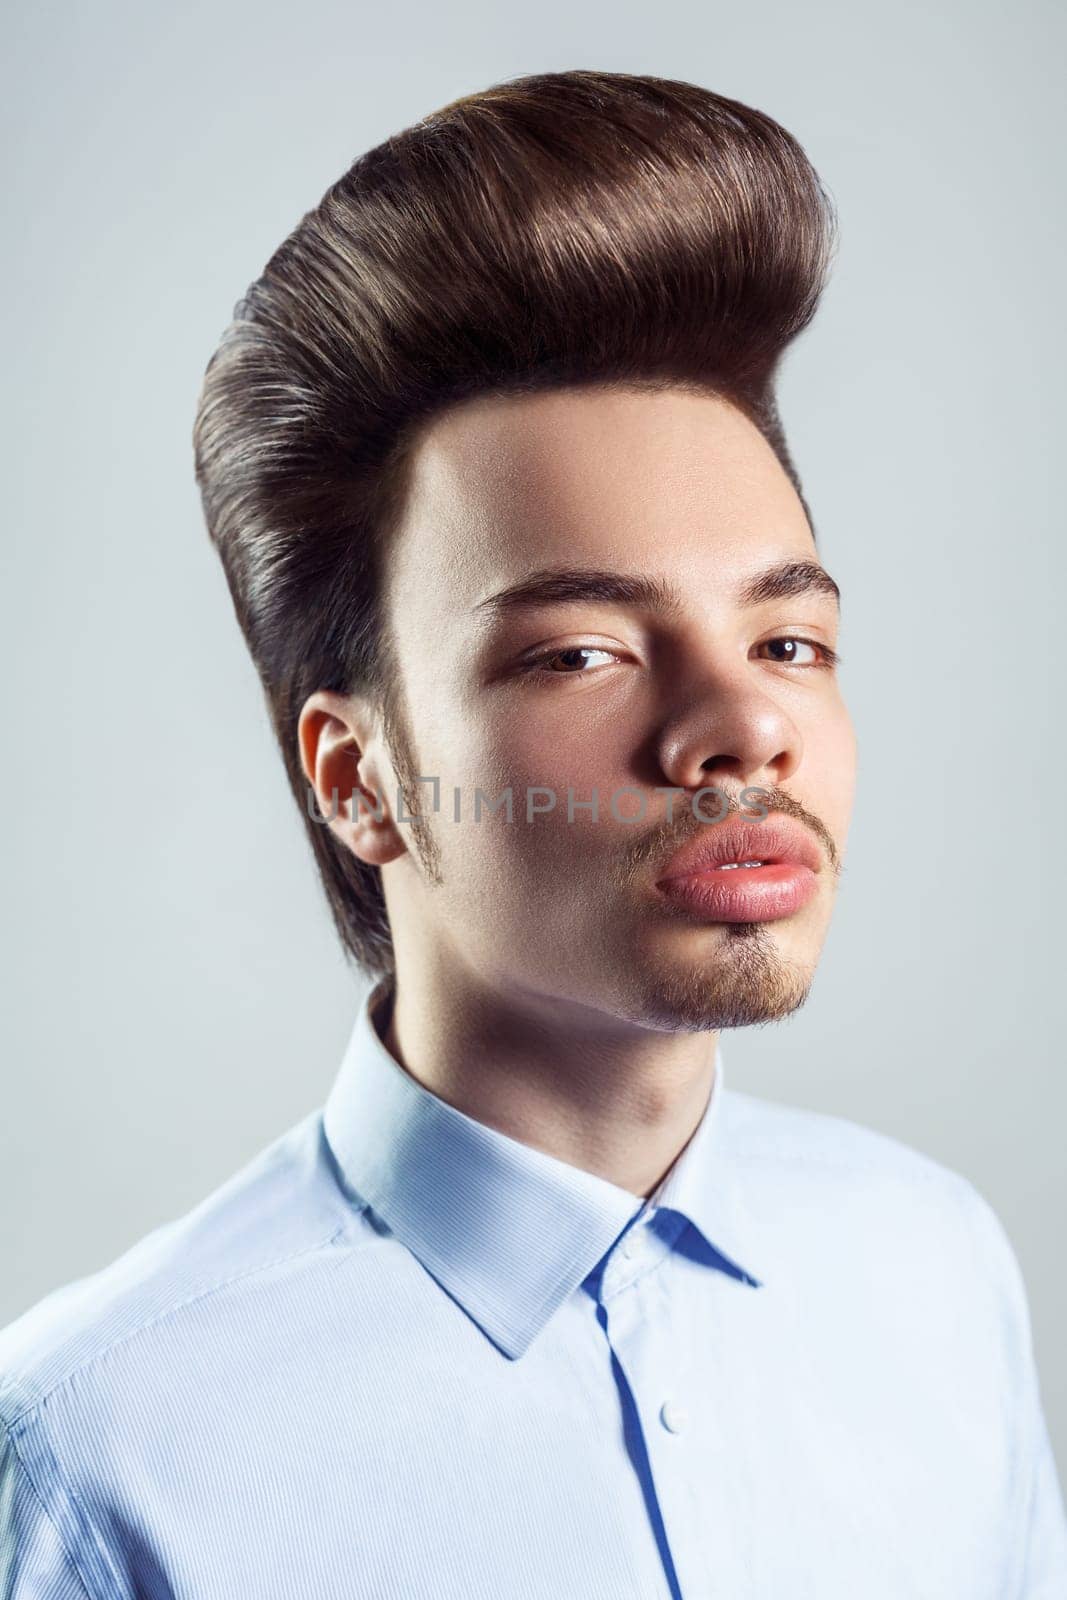 Slelf-confident man with mustache with retro pompadour hairstyle, looking with serious expression. by Khosro1